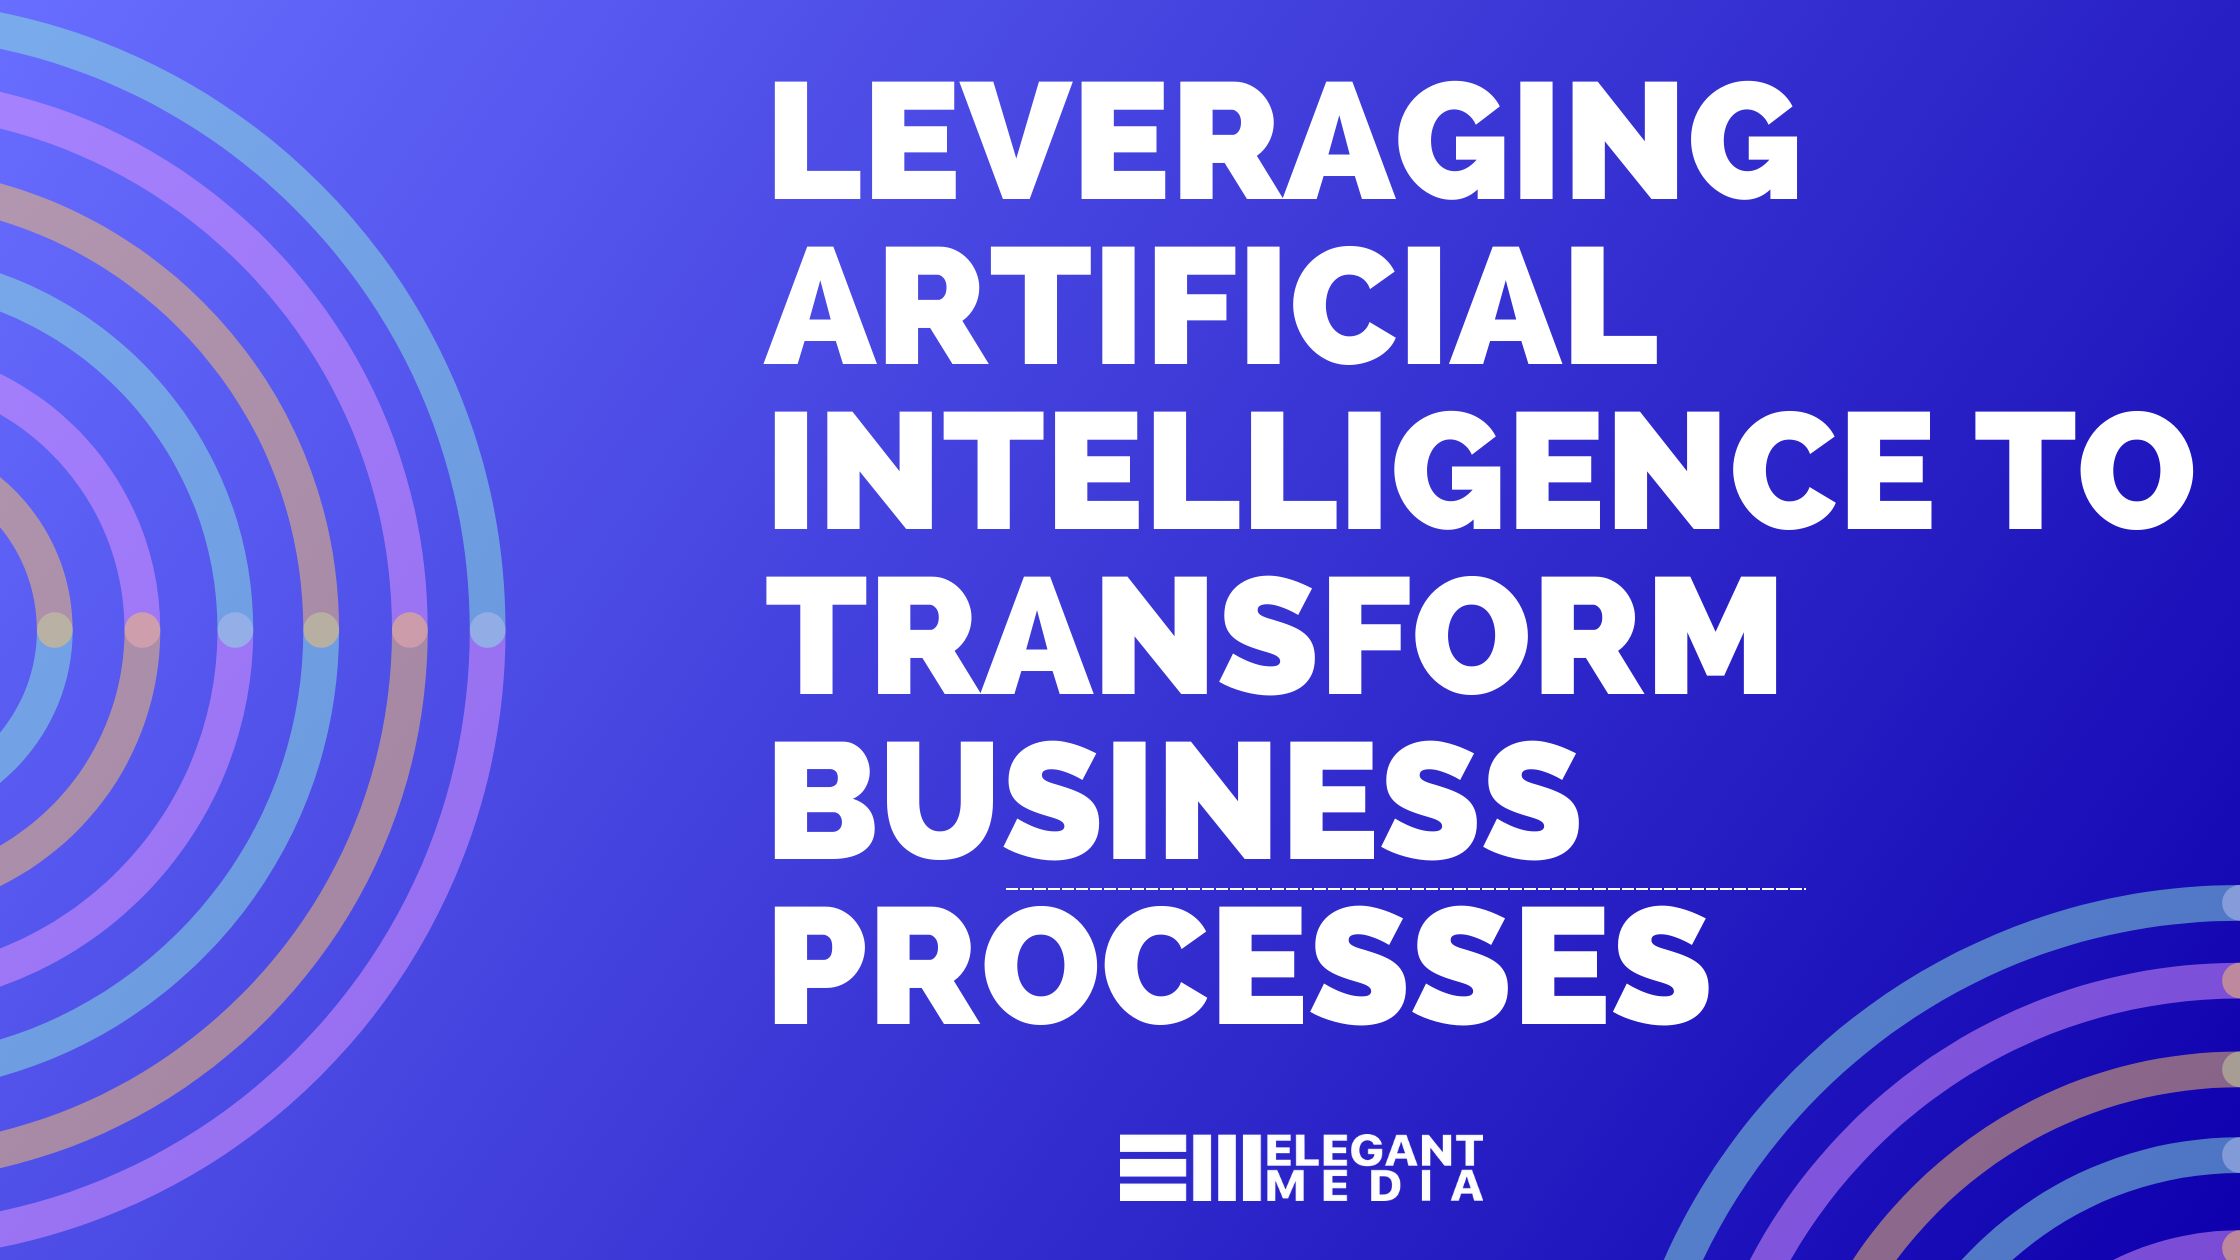 Leveraging Artificial Intelligence to Transform Business Processes